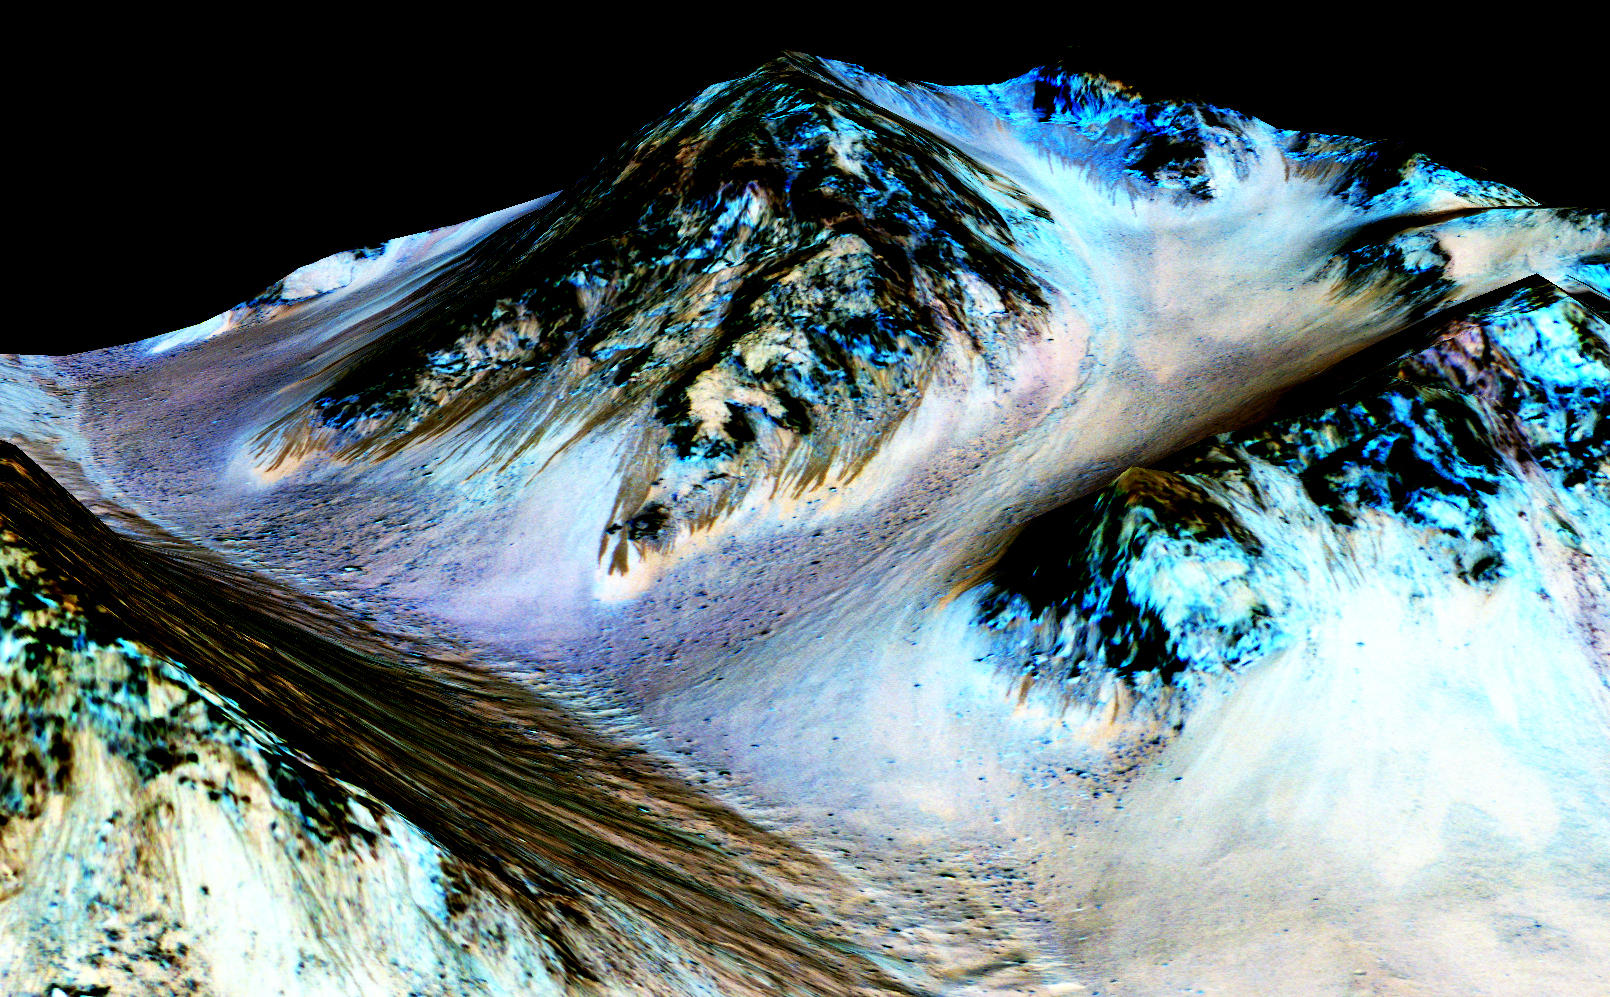 Recurring 'Lineae' on Slopes at Hale Crater, Mars